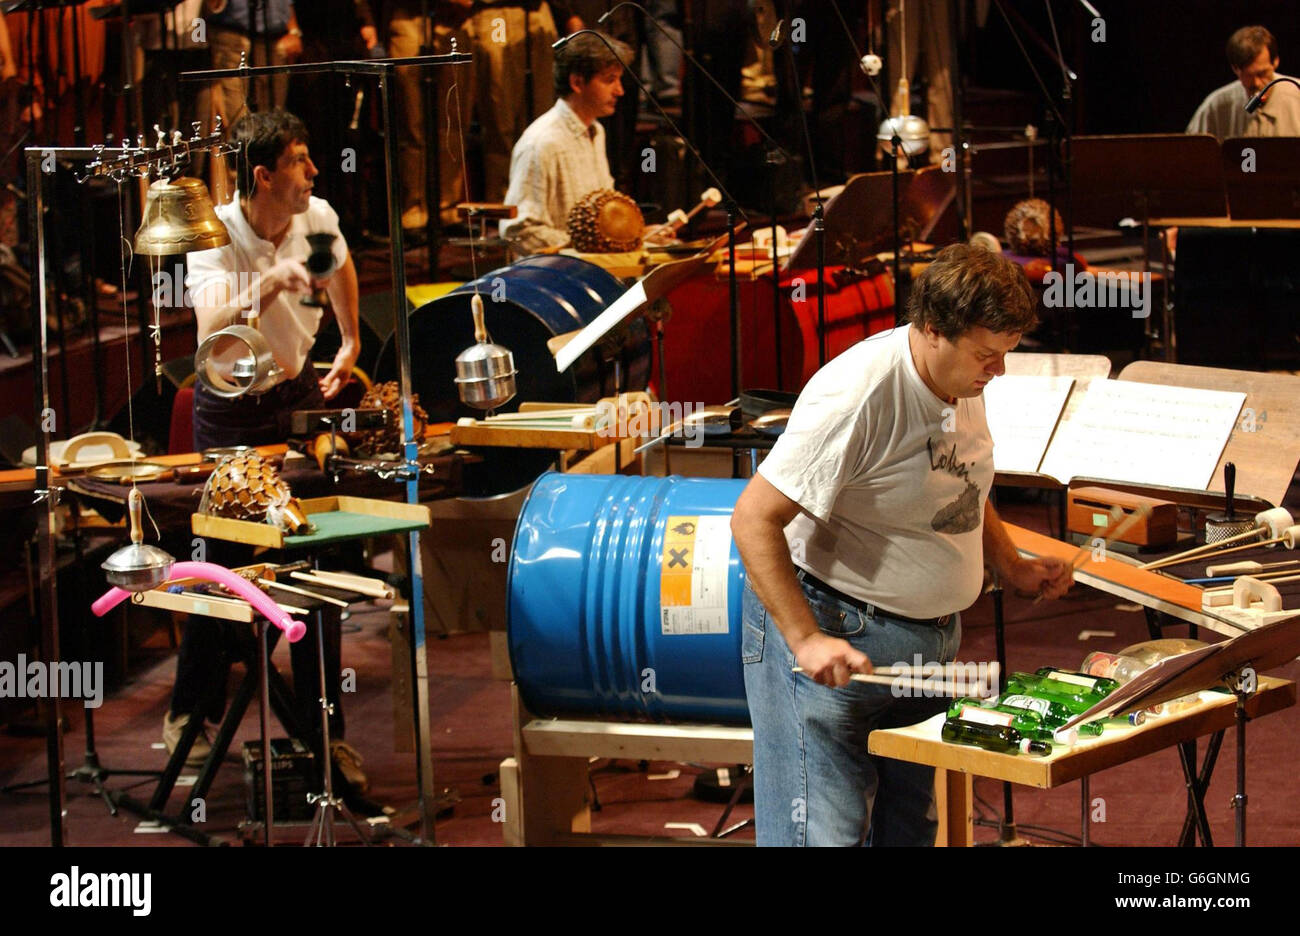 Zoltan Rasz, of Hungarian 'Amandinda Percussion Group' who make music with unusual instruments, playing assorted bottles, during a rehearsal at London's Albert Hall. Stock Photo